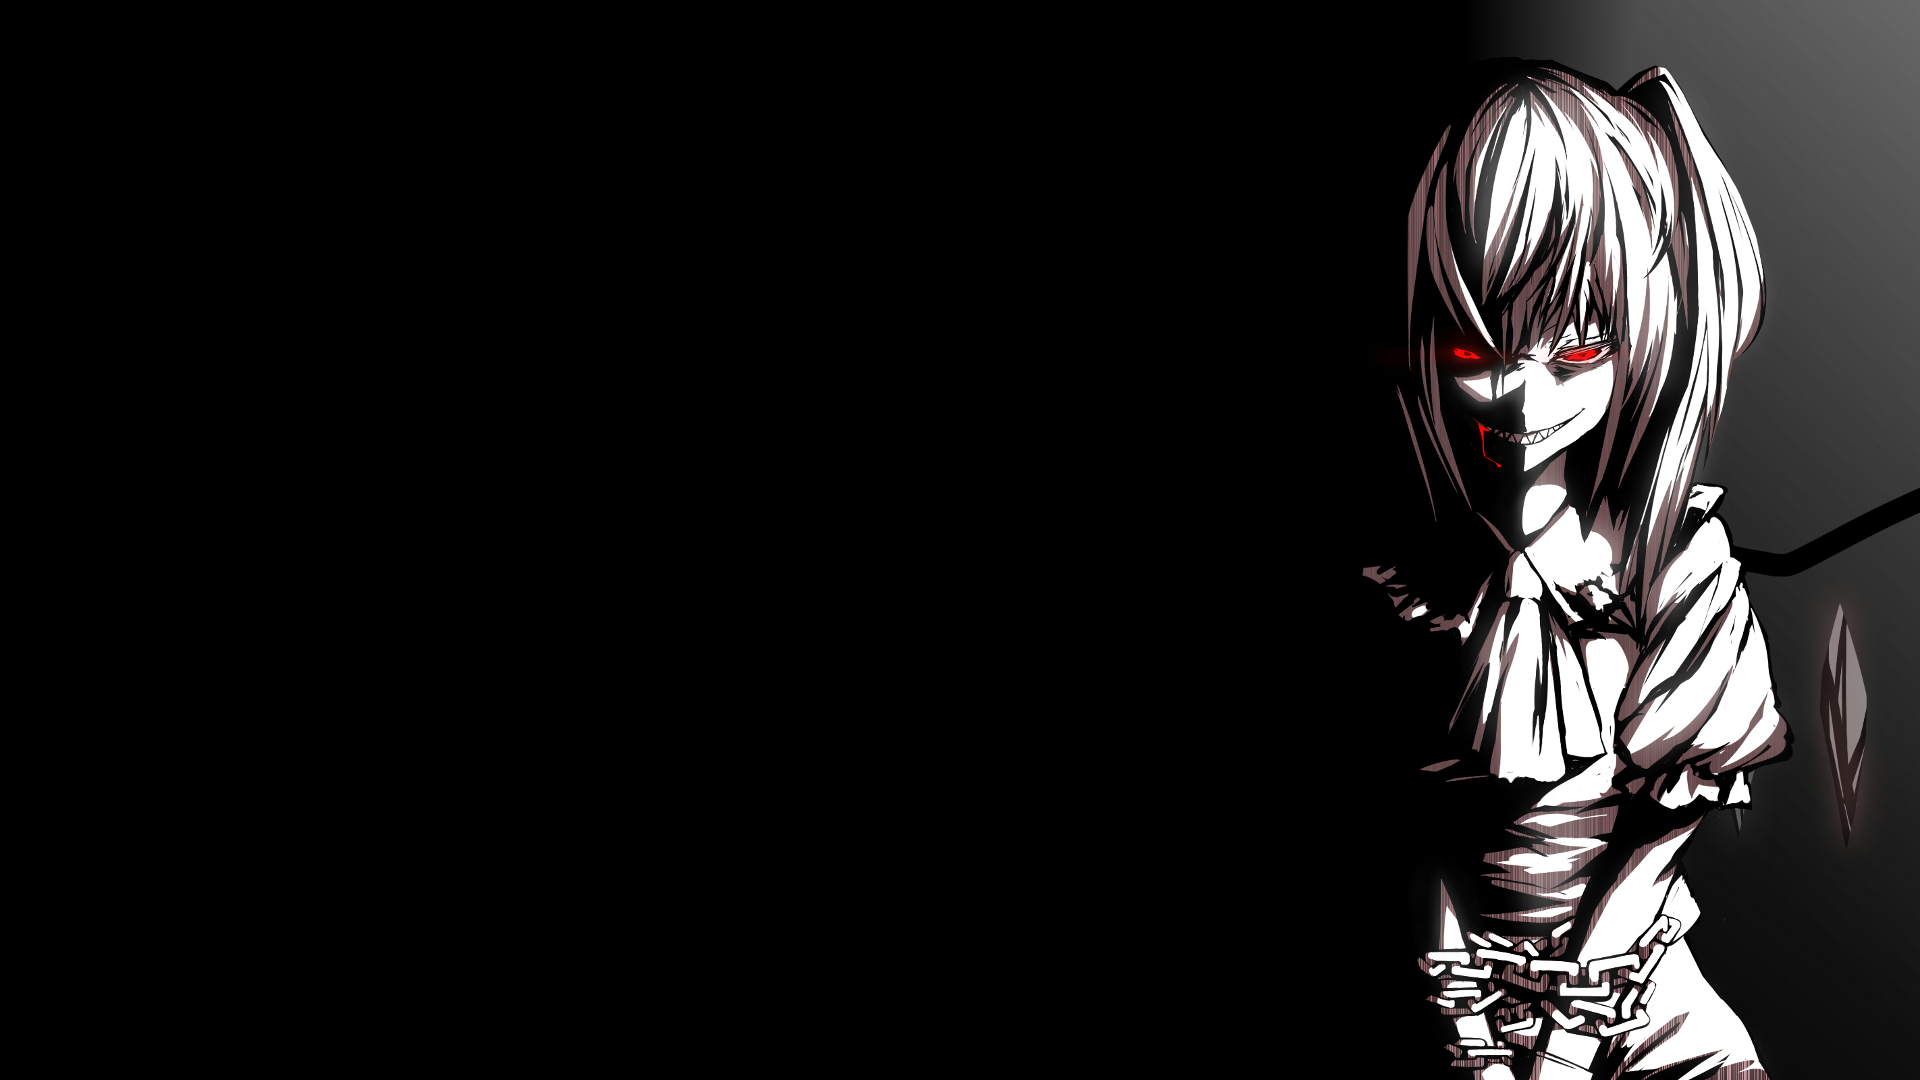 Download Creepy Anime Wallpapers Wide For Widescreen Wallpapers